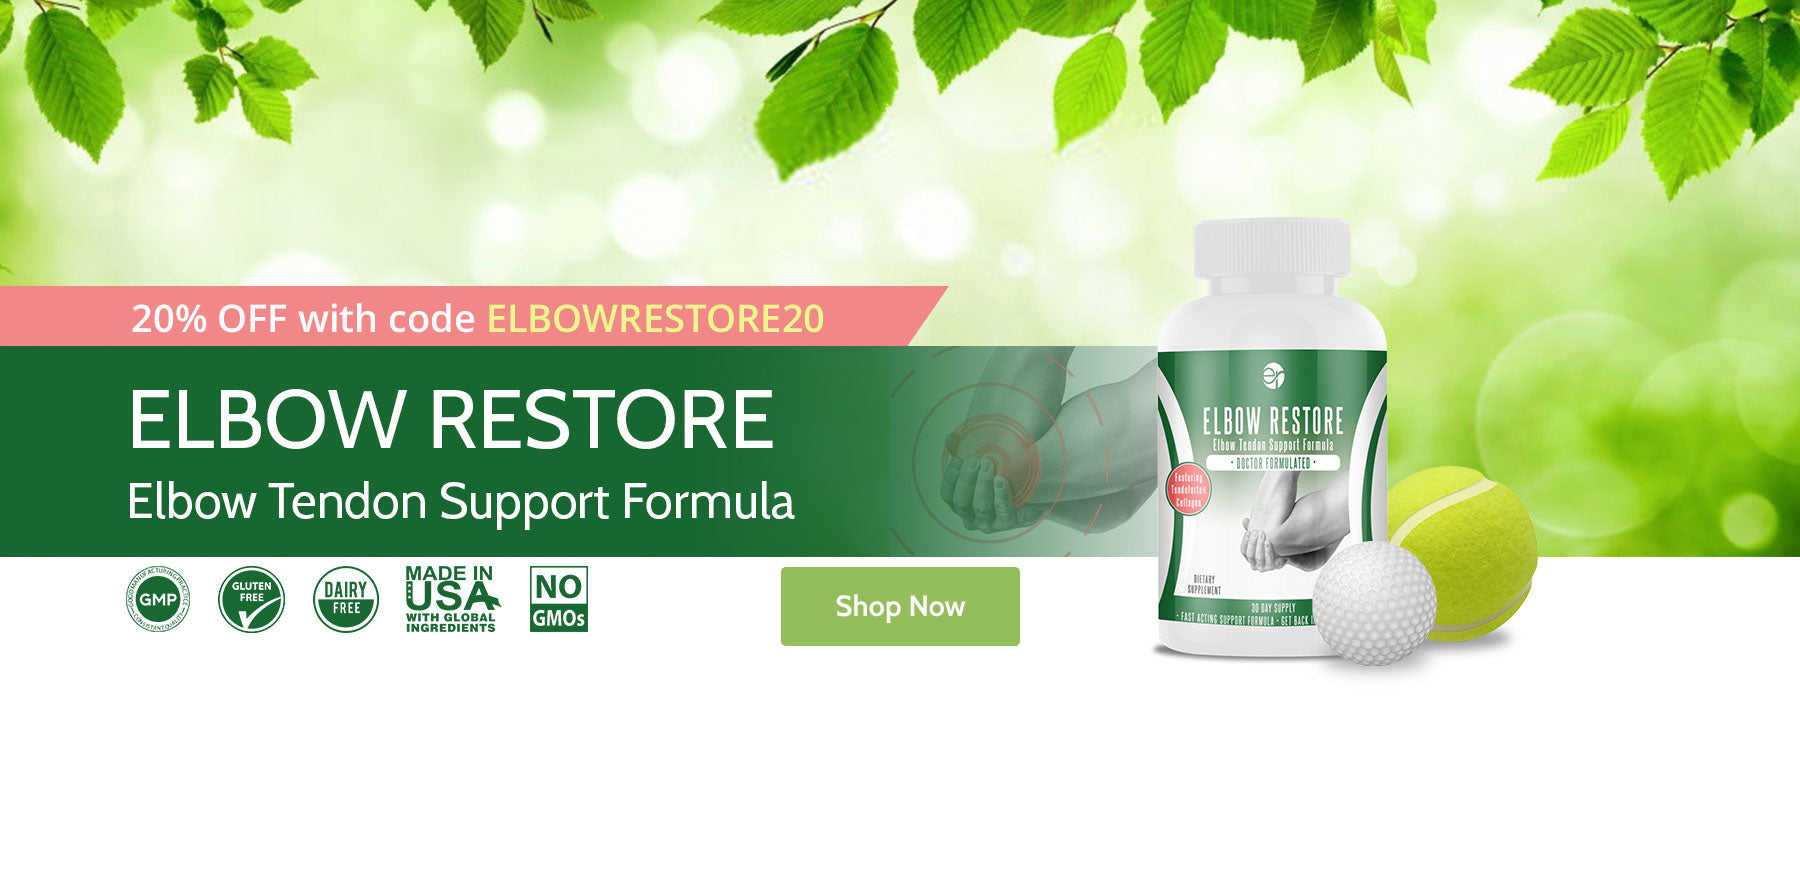 Elbow Restore - Elbow Tendon Support Formula - Get 20% OFF with code ELBOWRESTORE20